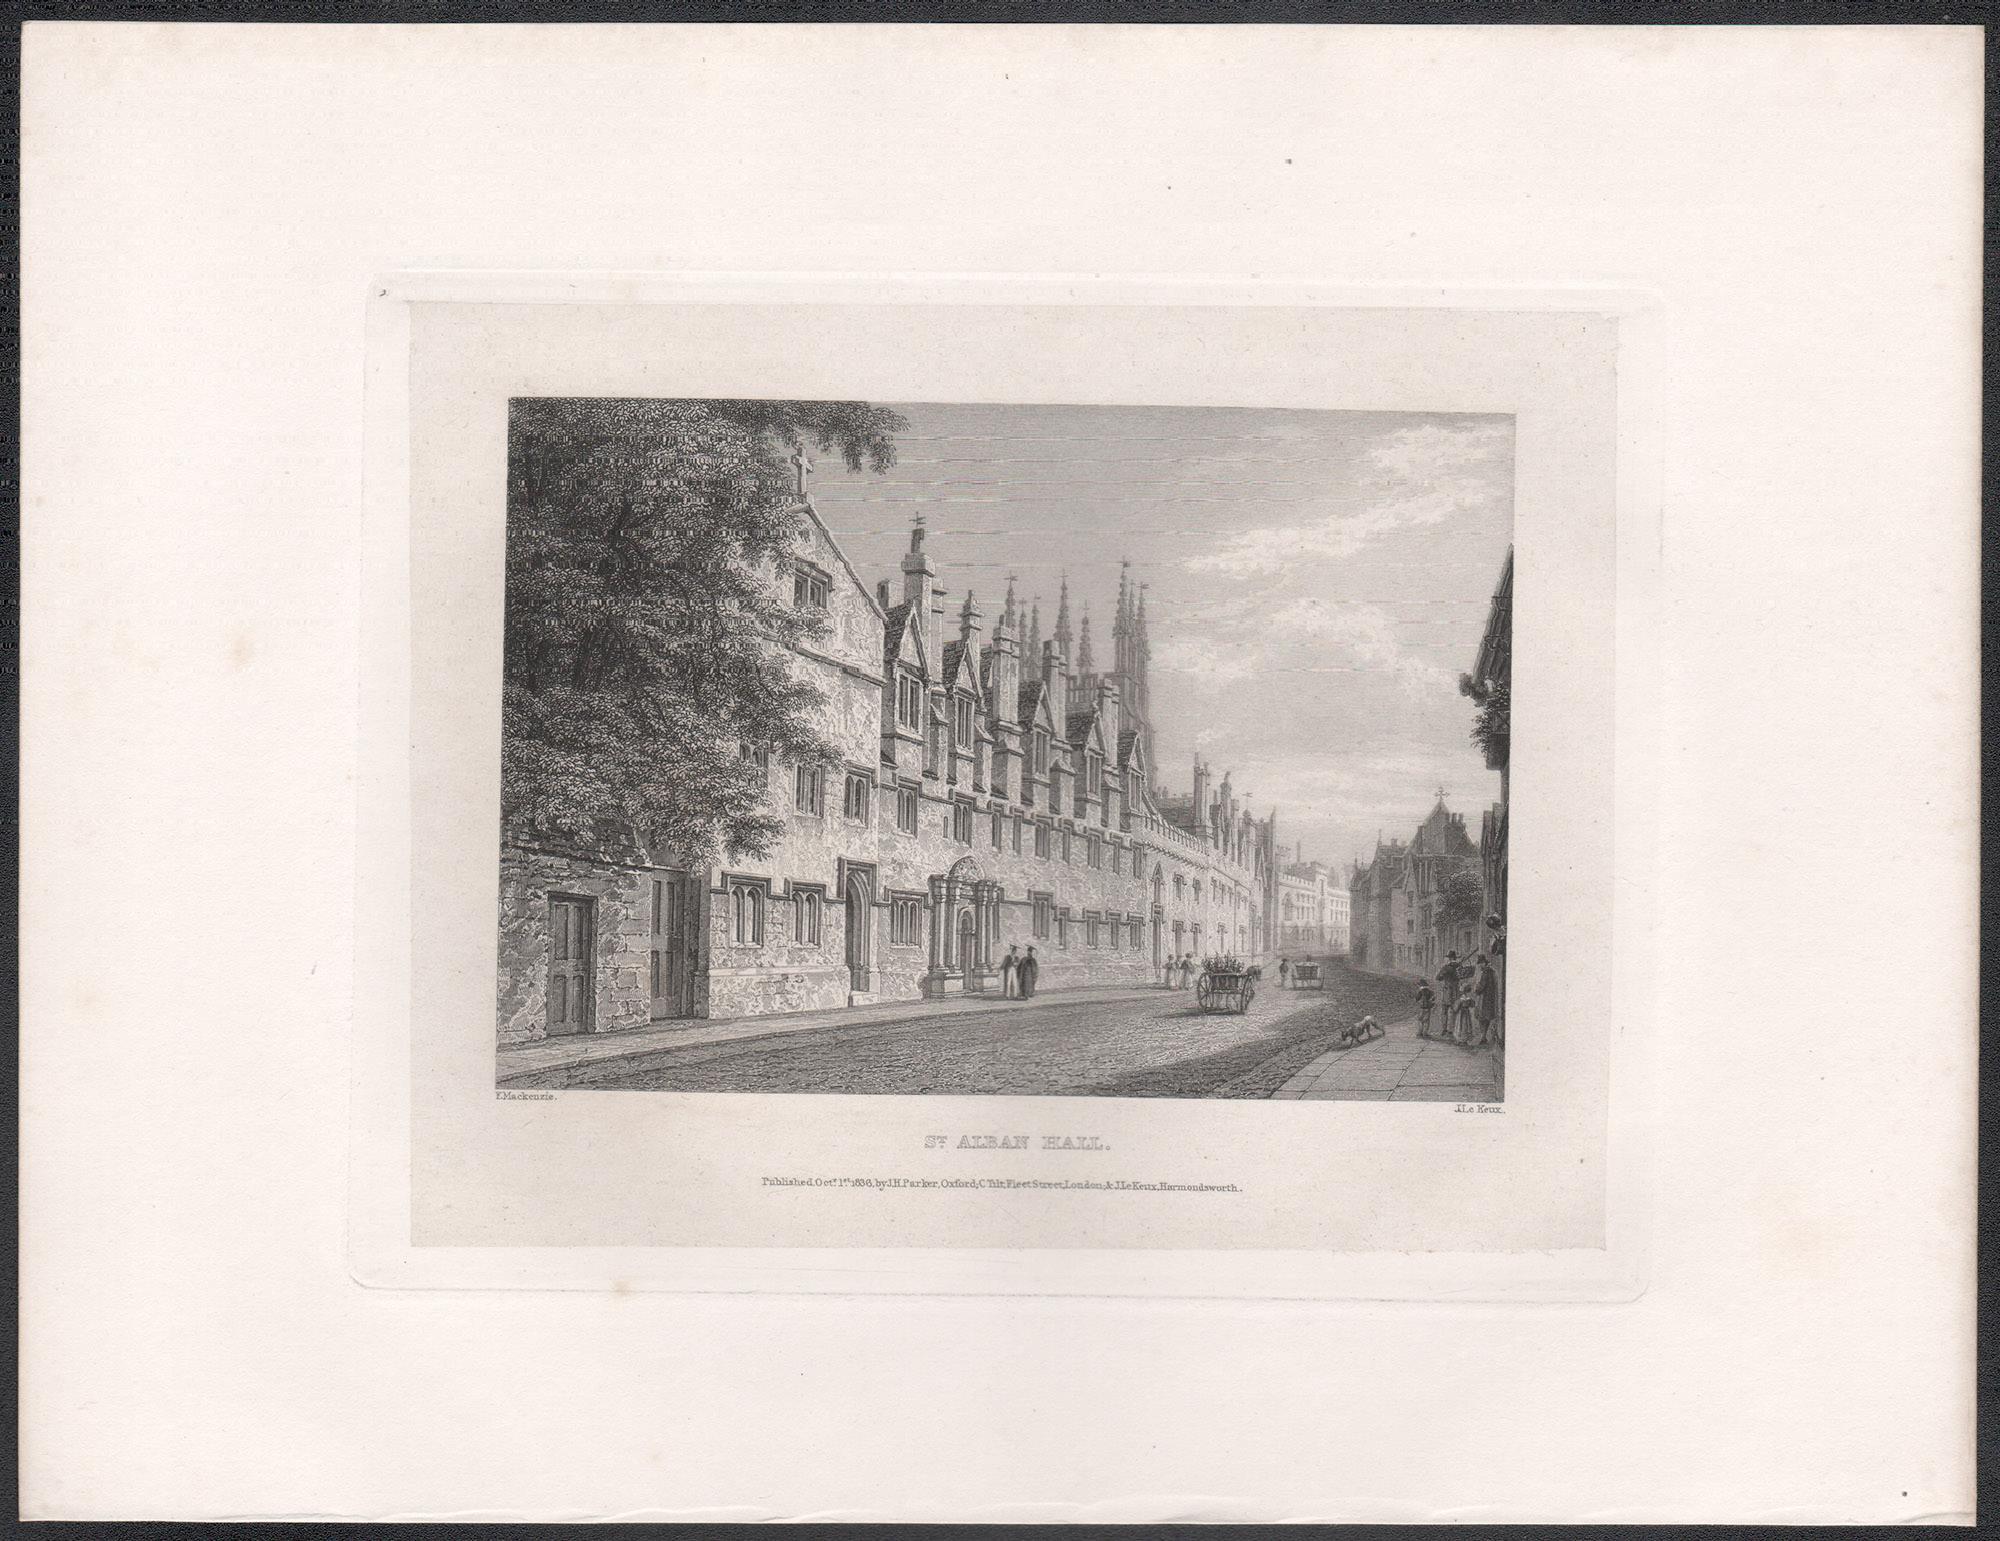 St Alban Hall. Oxford University. Antique C19th engraving - Print by John Le Keux after Frederick Mackenzie